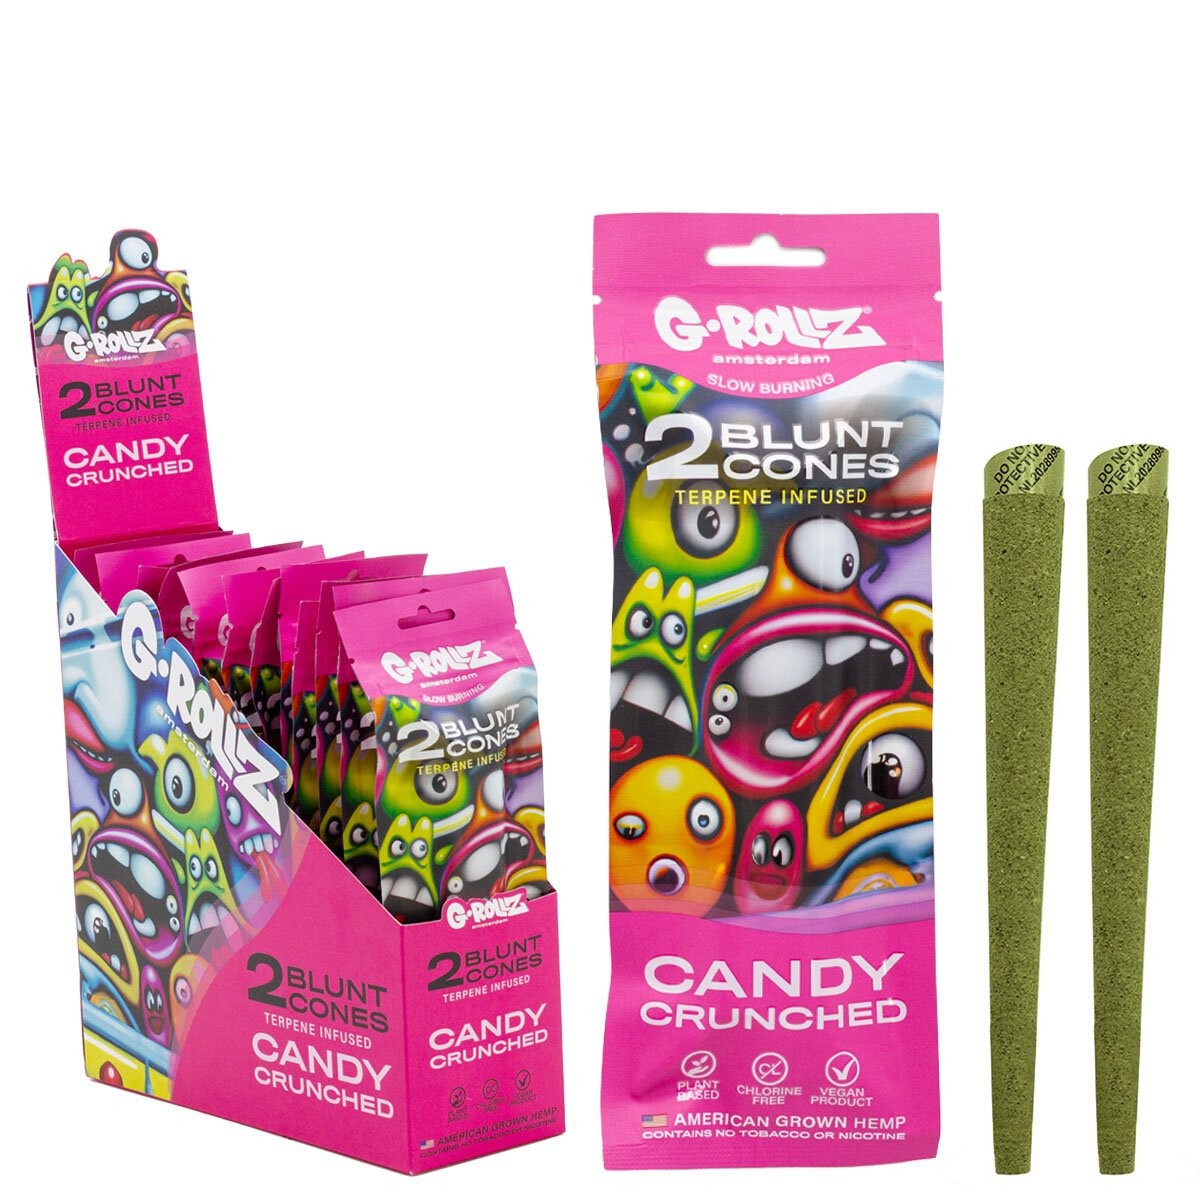 G-ROLLZ Blunt 2x Candy Crunched Pre-Rolled Hemp Wraps